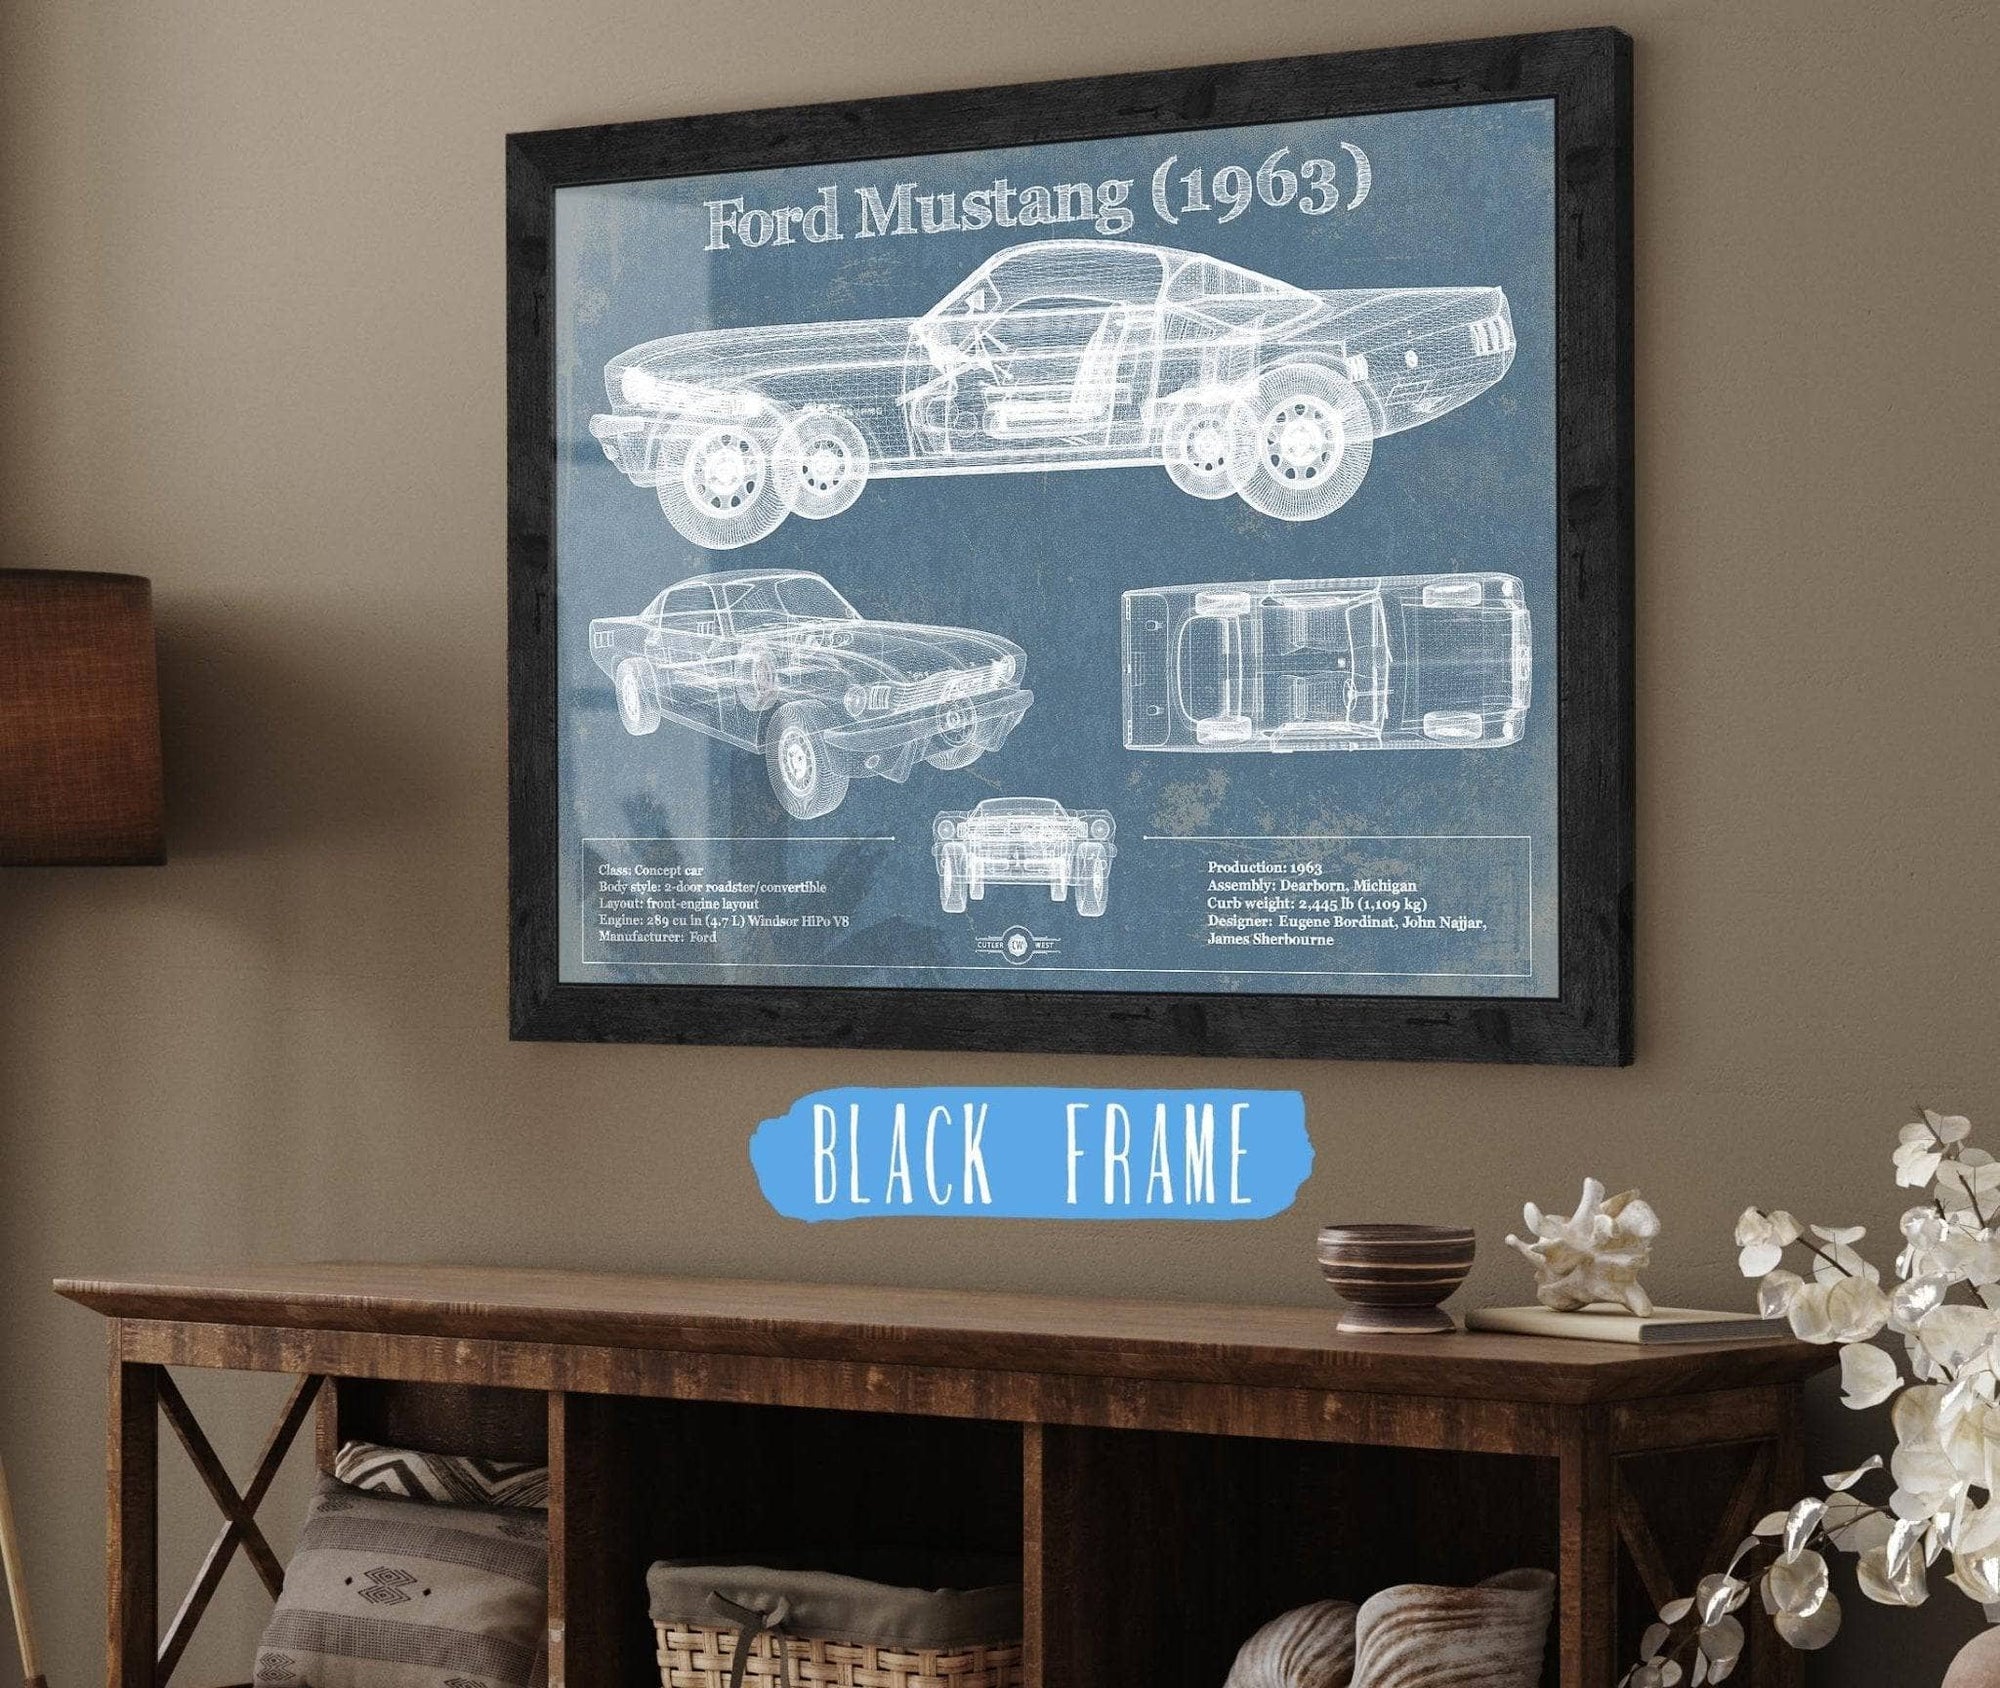 Cutler West Ford Collection 14" x 11" / Black Frame Ford Mustang 1963 Original Blueprint Art 870268486-TOP